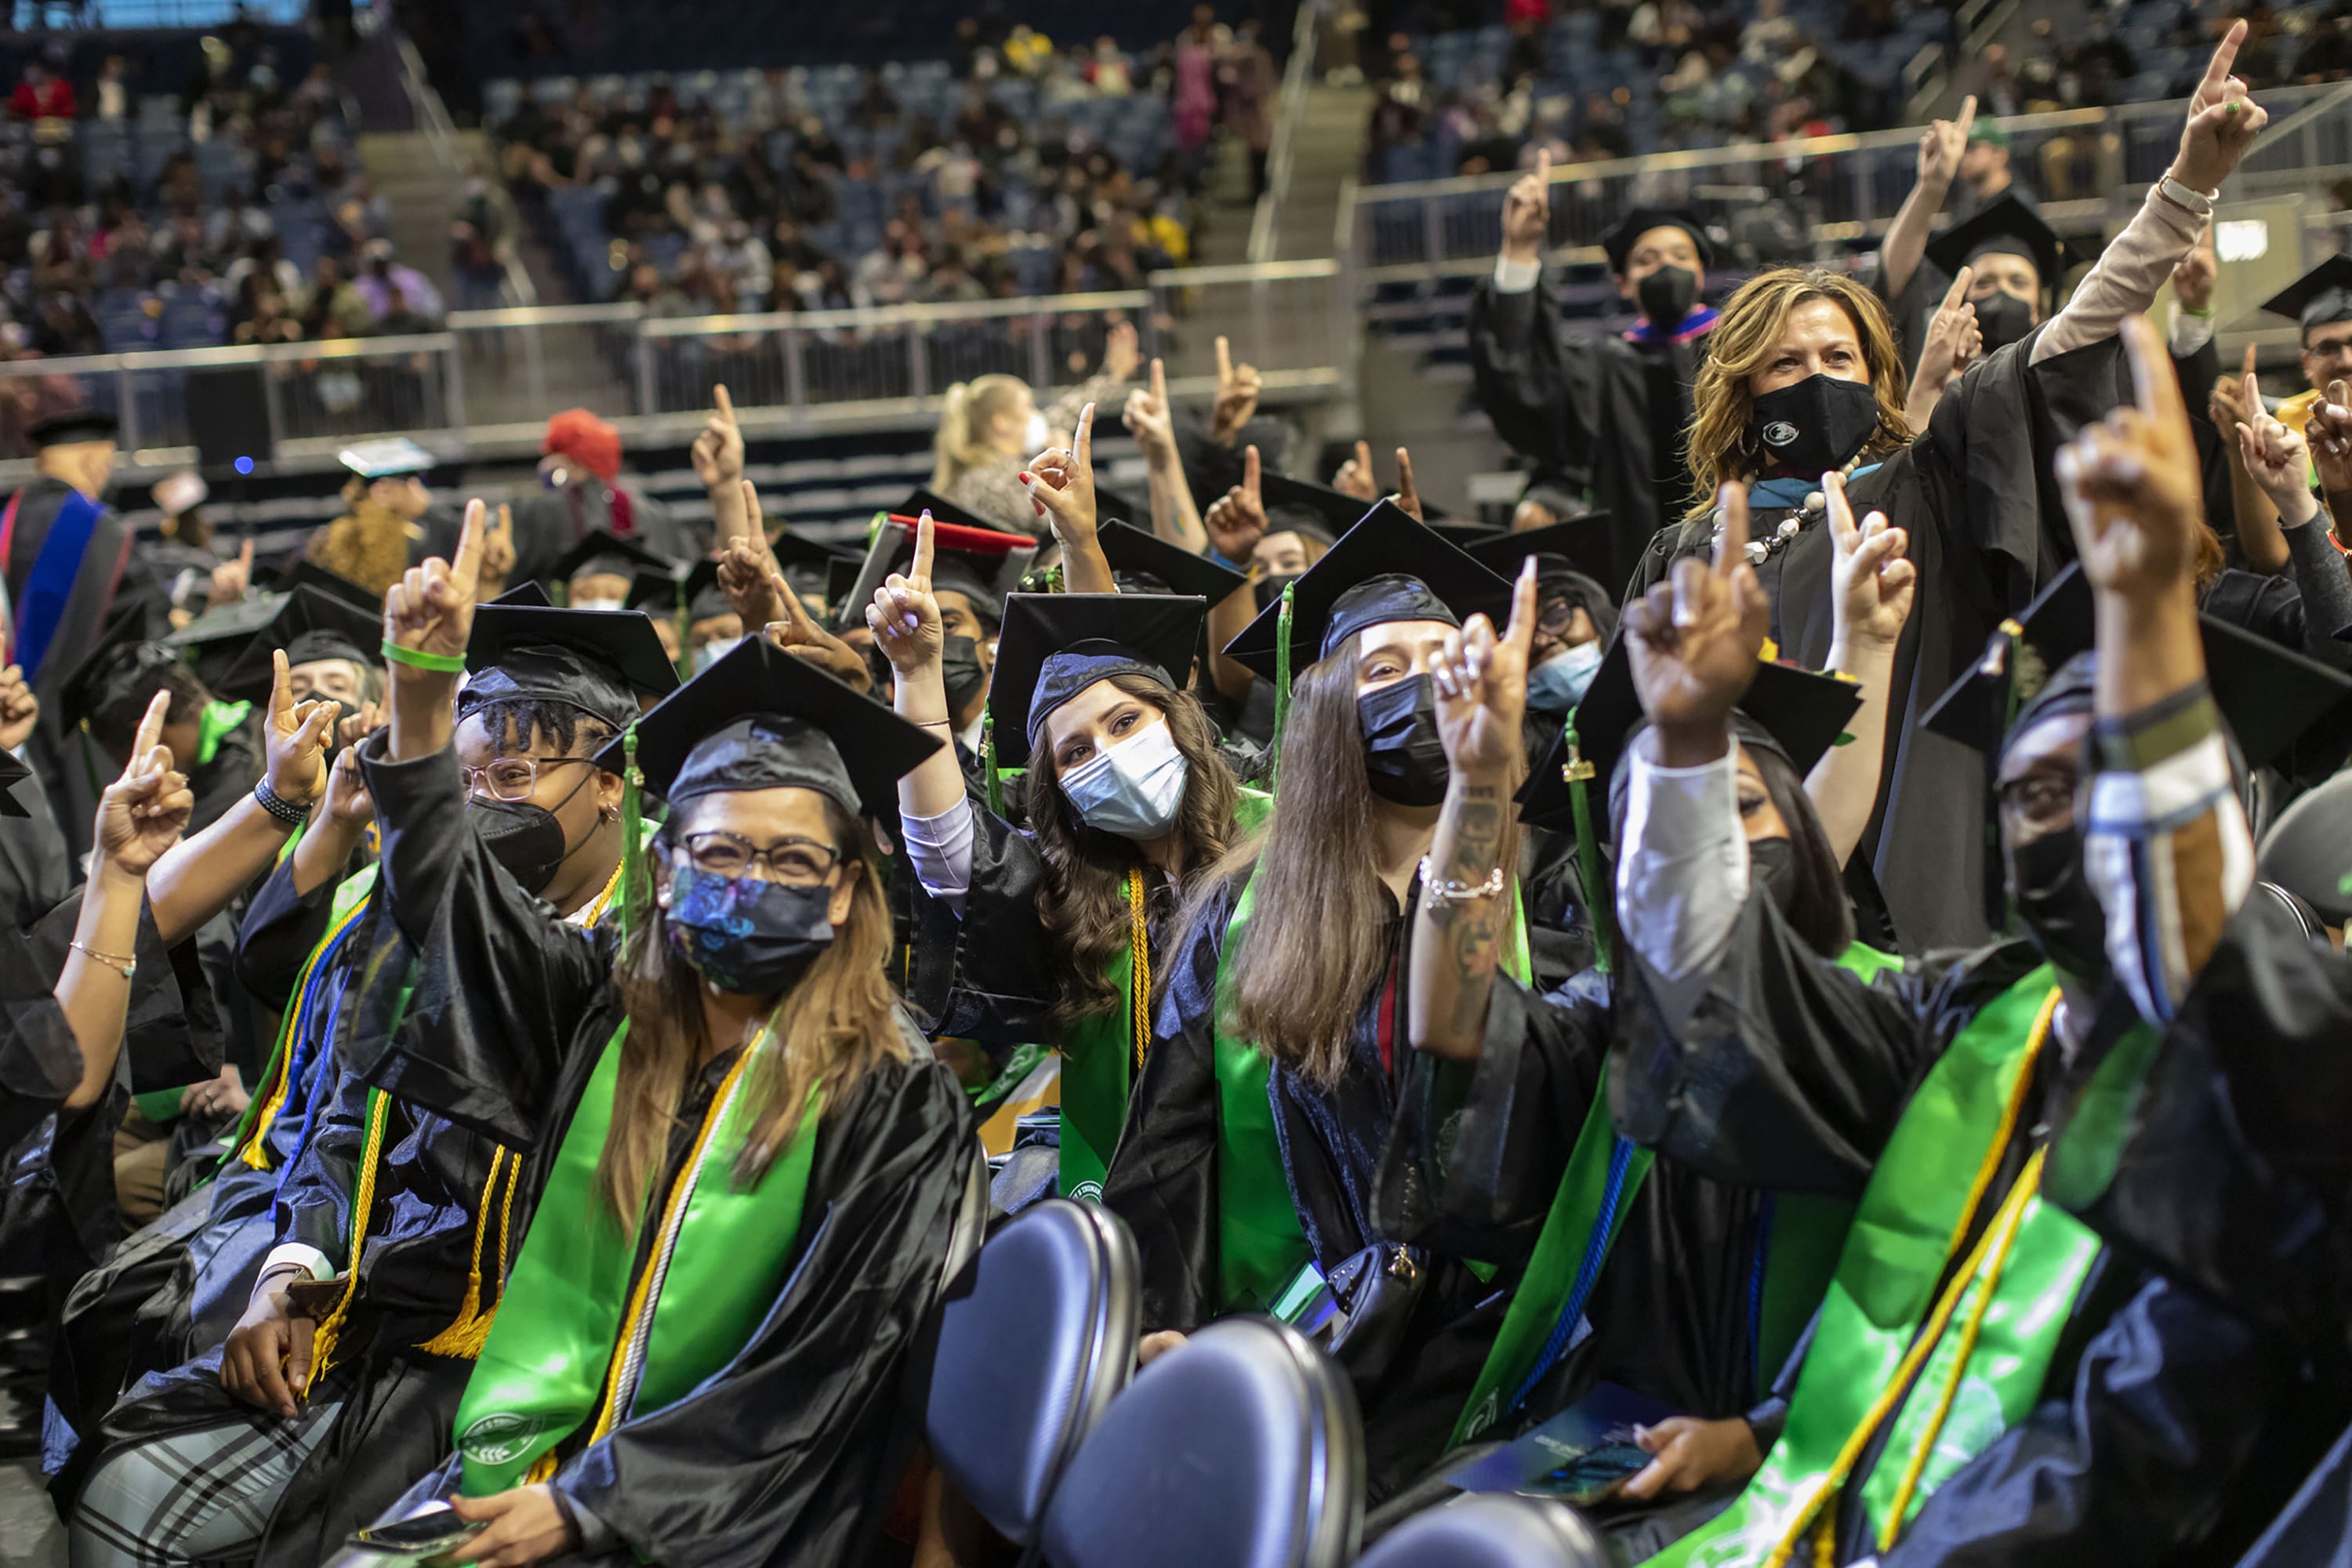 Young people wearing graduation caps and gowns point fingers up in the air.